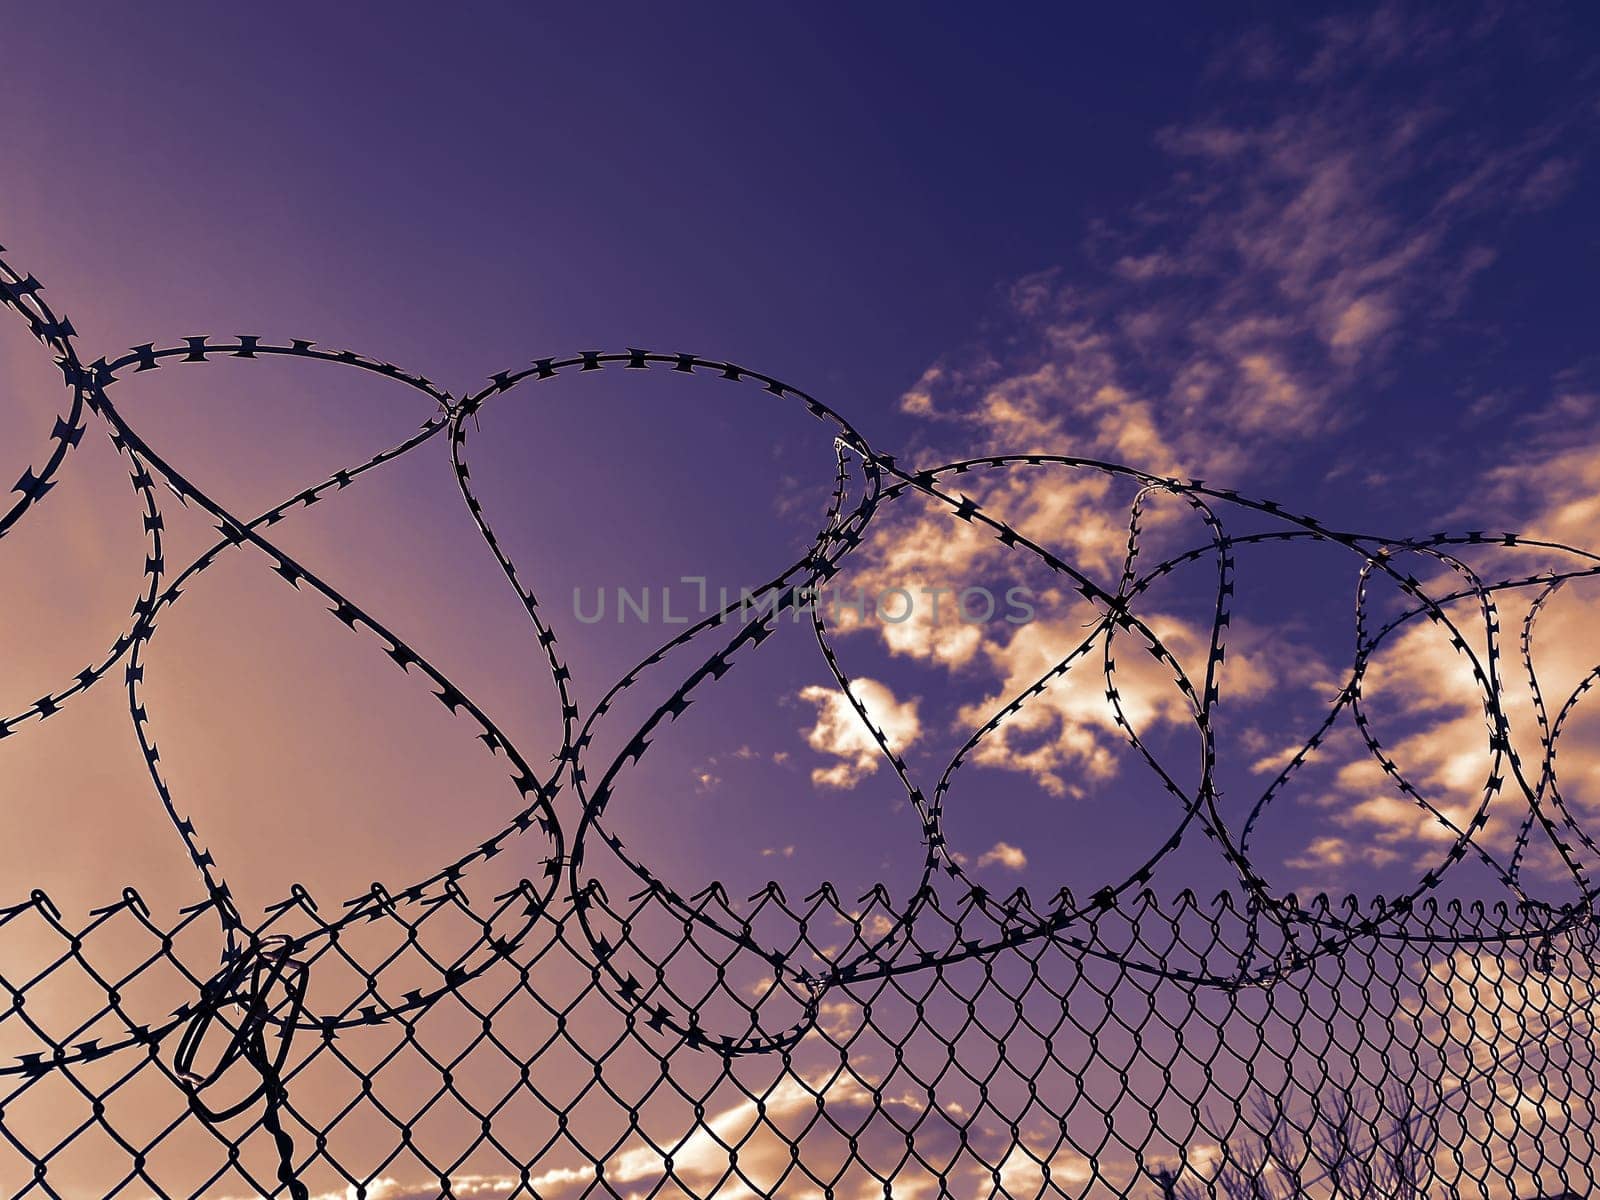 Barbed wire fence. Stretched and wound metal wire. A dramatic photo, the concept of injustice, prison, restrictions on rights and freedoms.